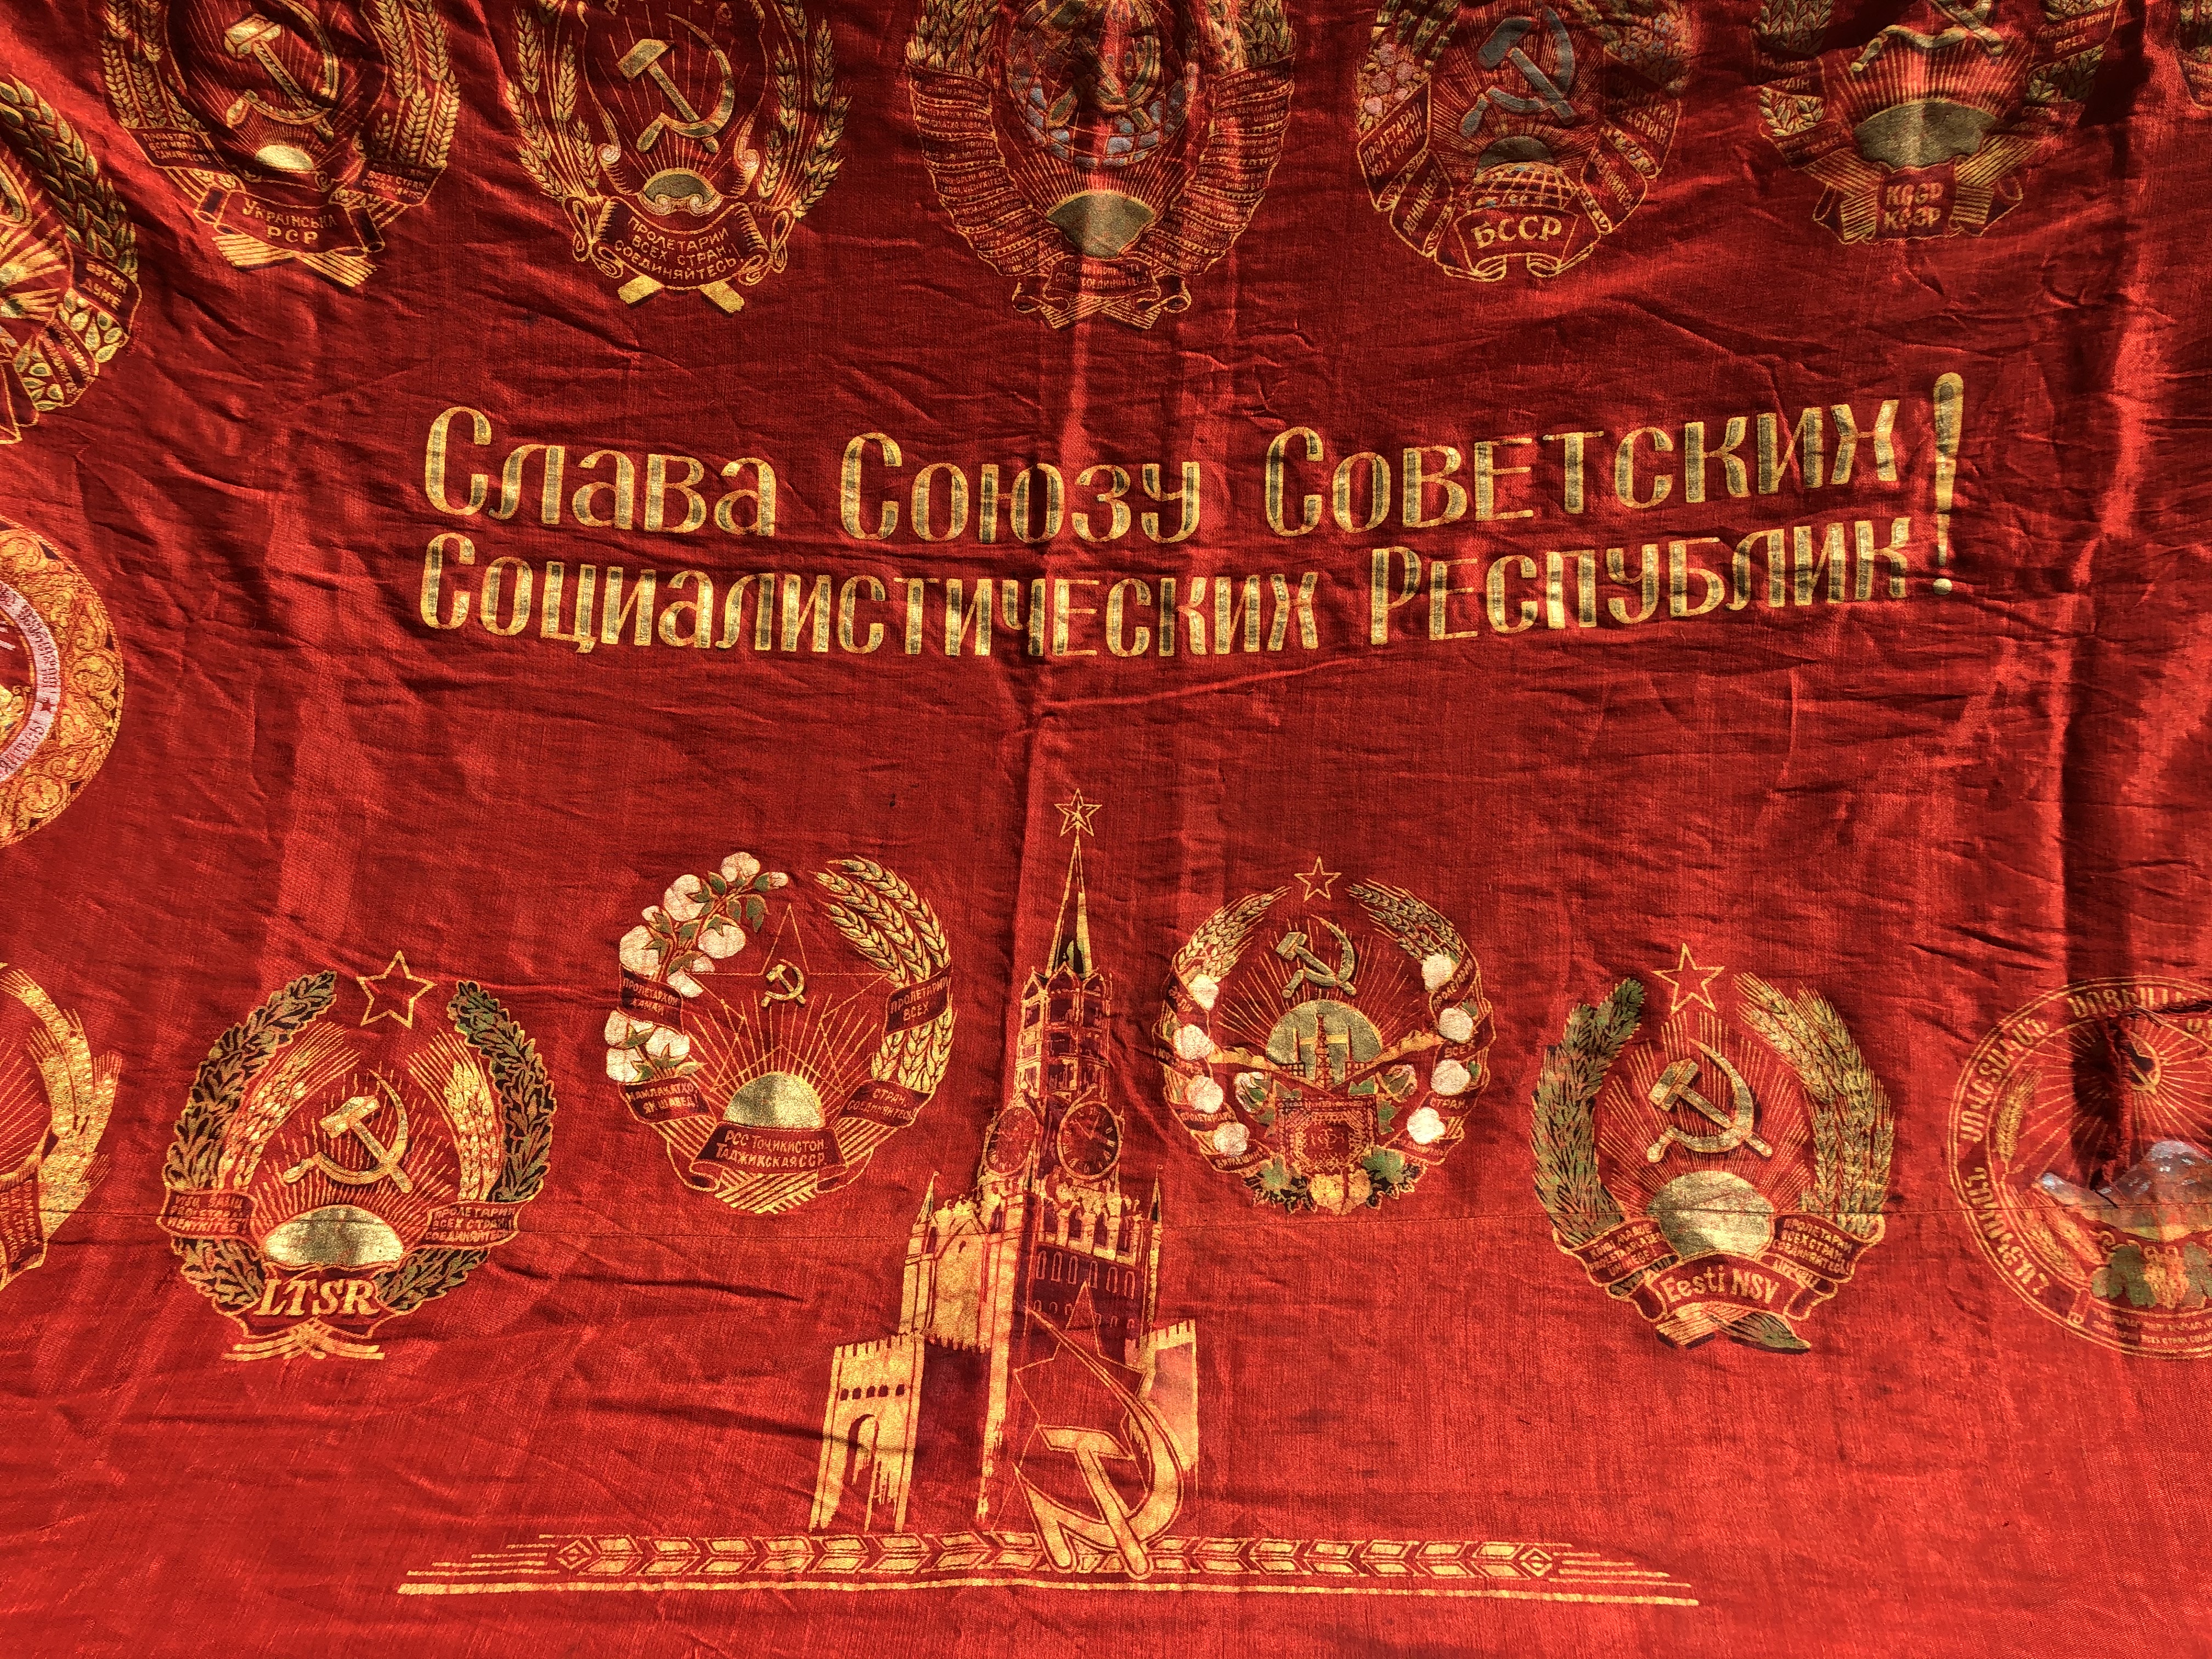 2-soviet-collector-s-item-lenin-flag-from-the-soviet-union-beautiful-large-flag-with-the-portrait-of-vladimir-ilich-lenin-and-state-emblems-of-the-soviet-union-state-24-.jpg